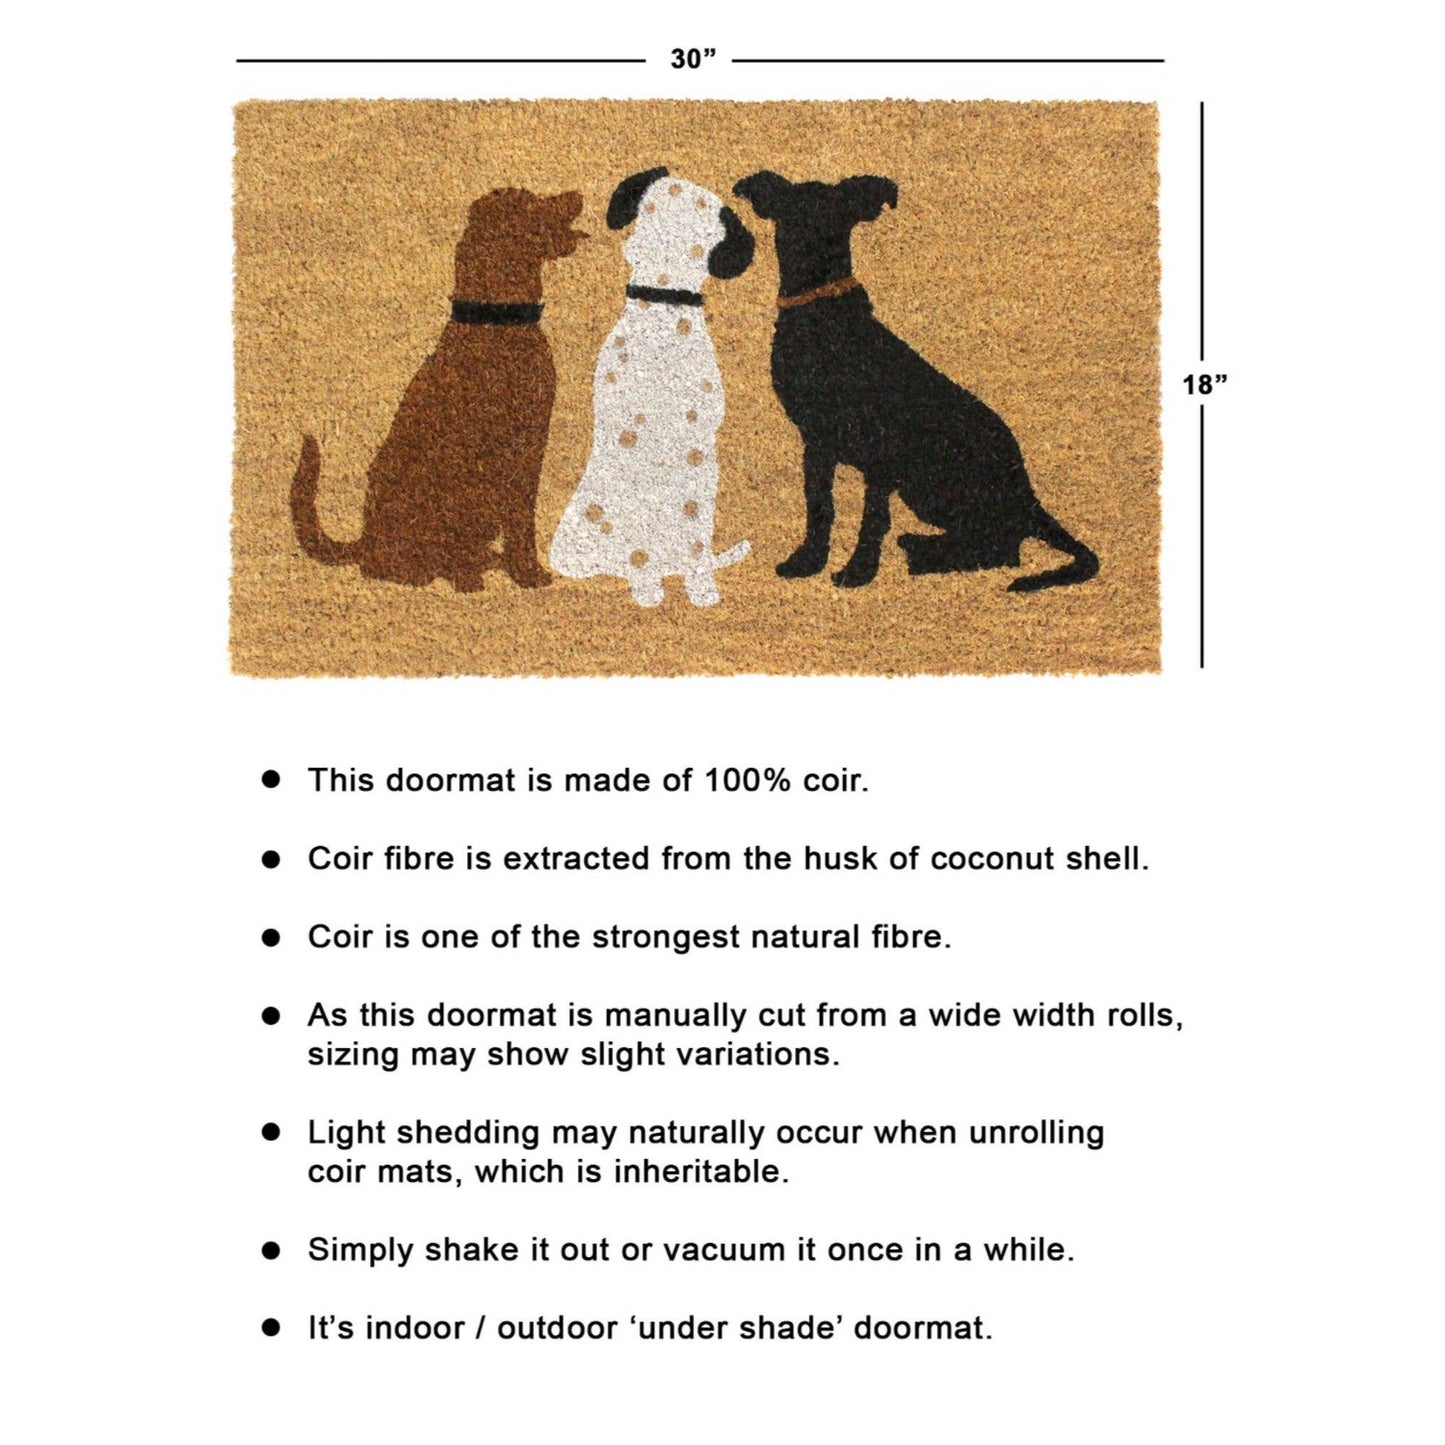 RugSmith White Machine Tufted Dogs Doormat, 18" x 30"Heart